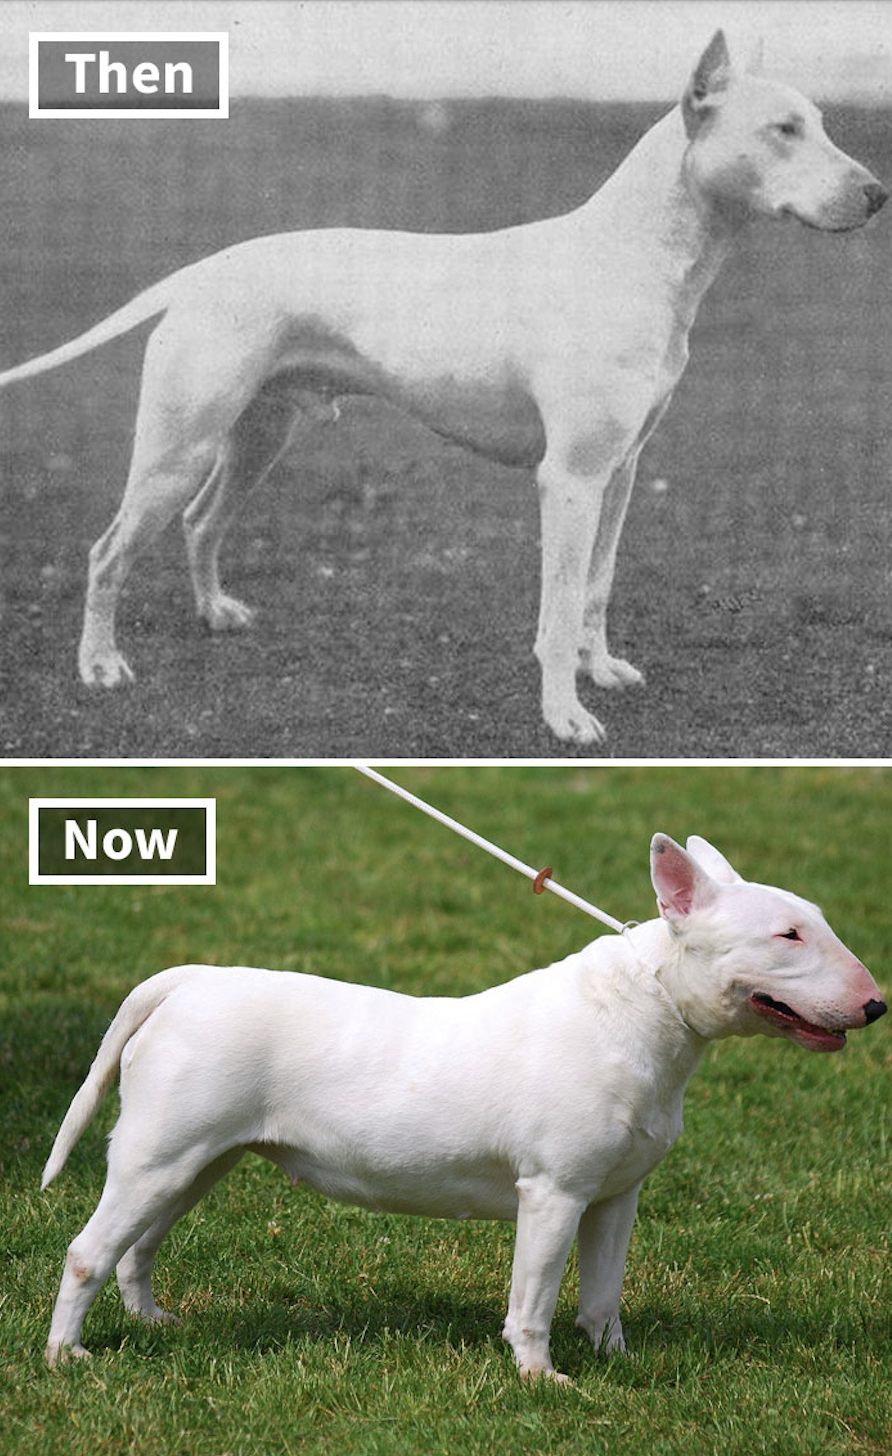 bull terrier 100 years ago - Then Now